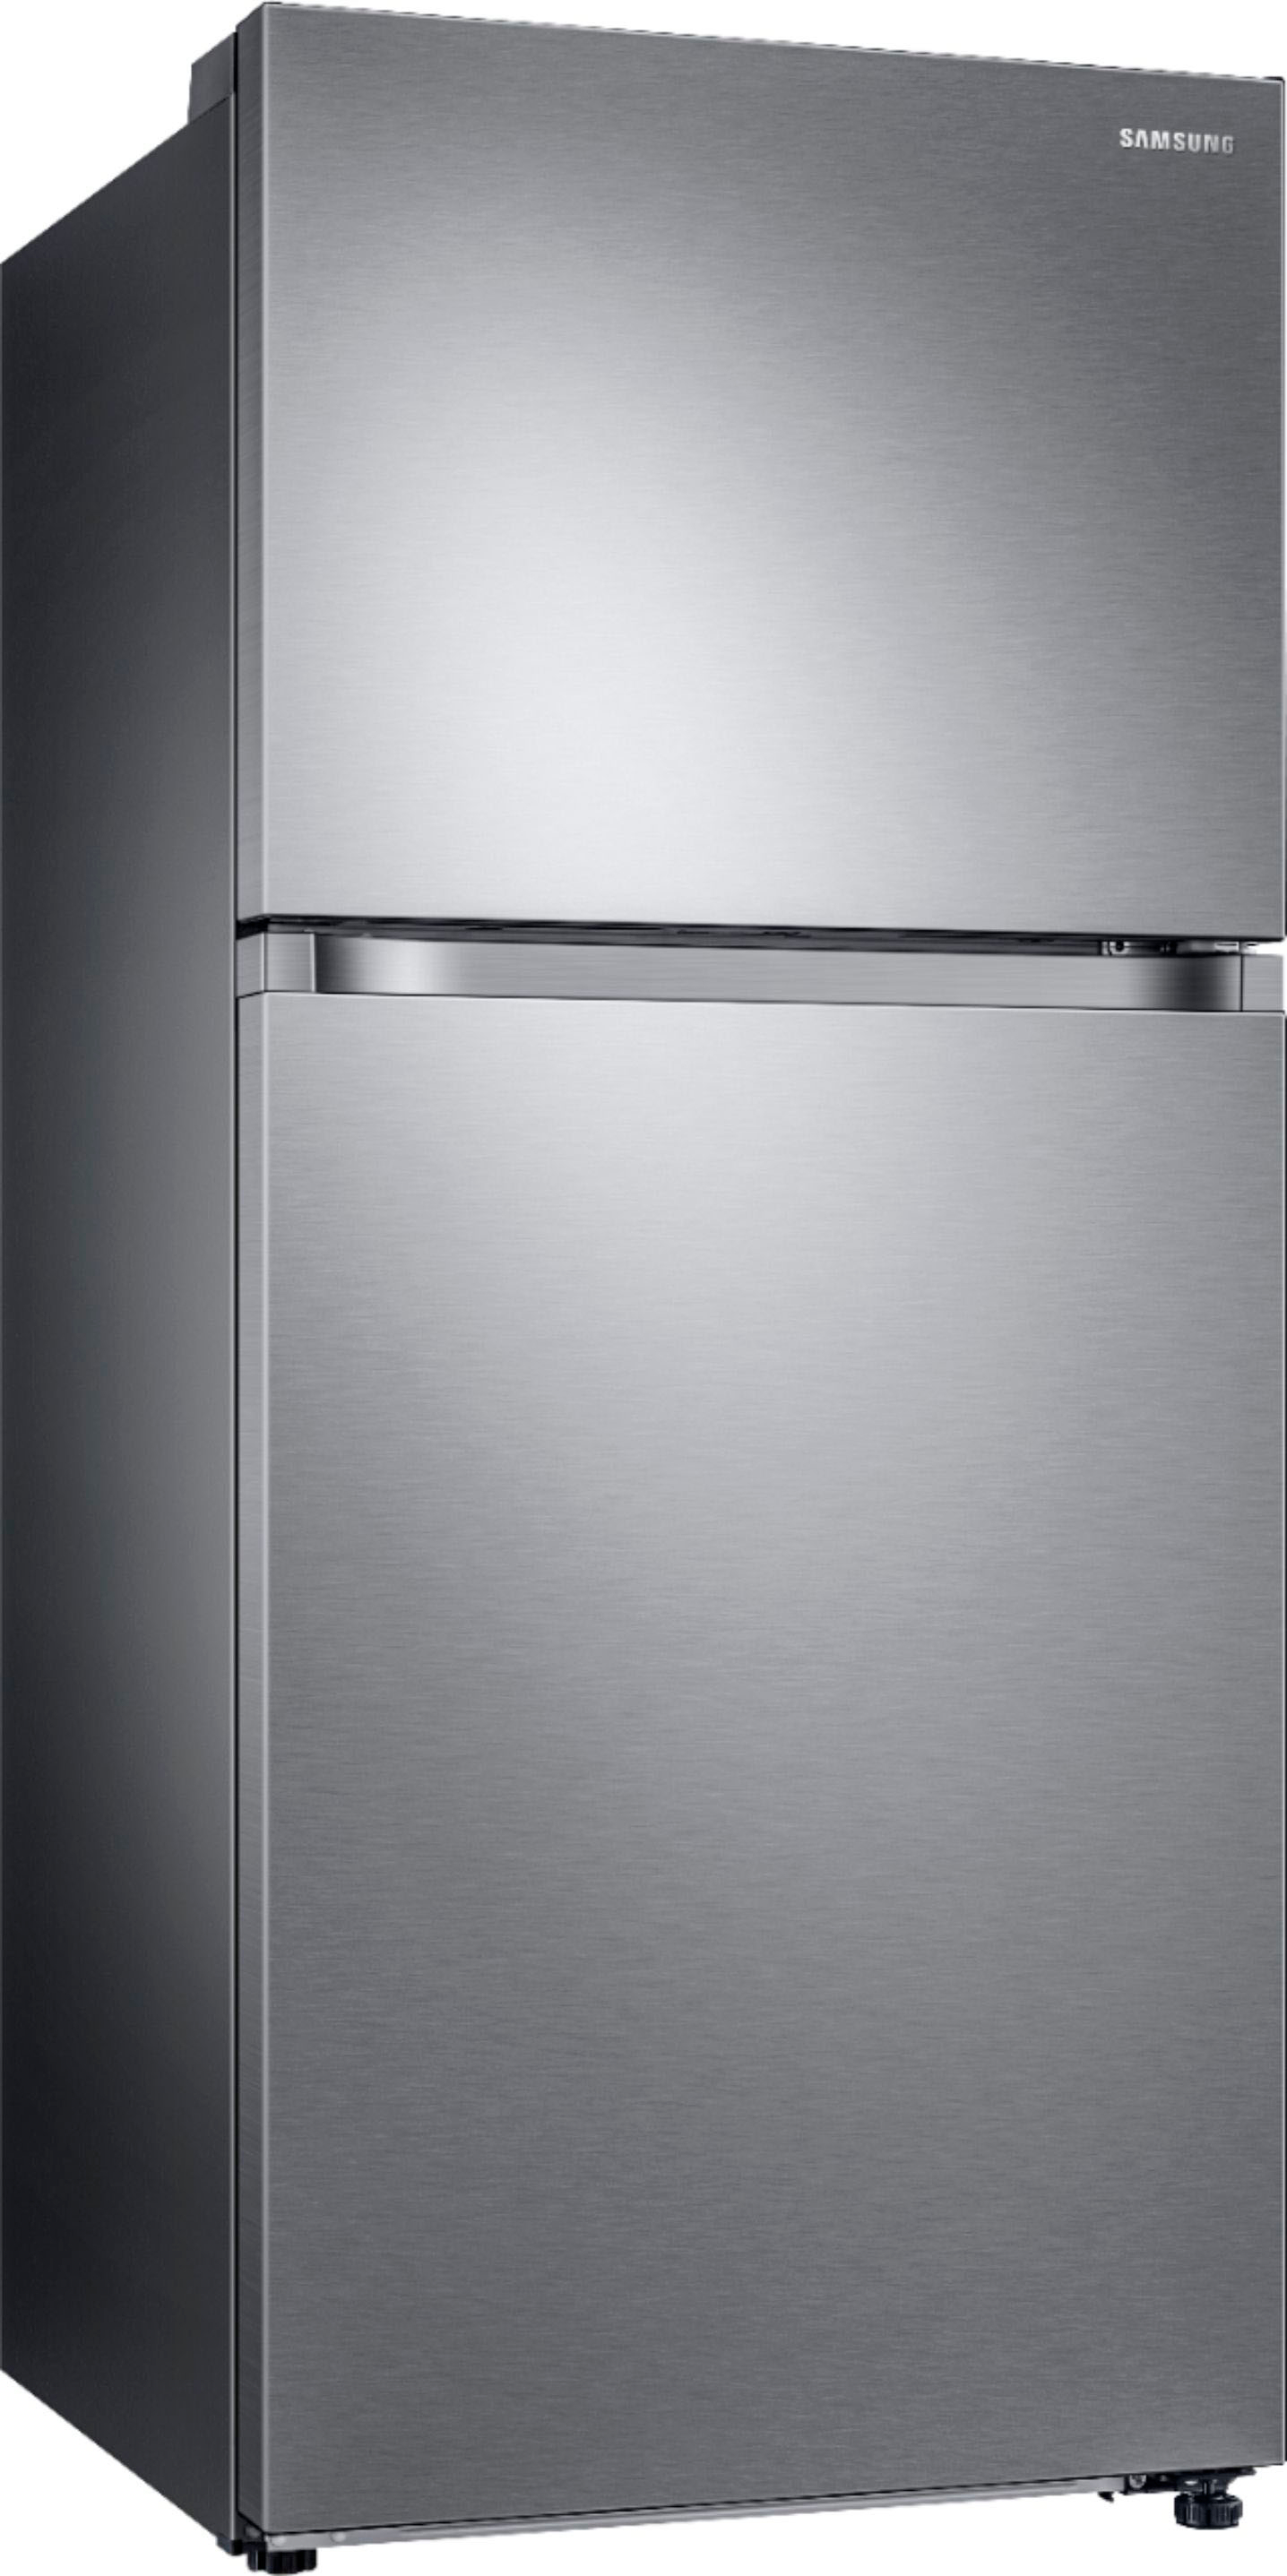 Angle View: Samsung - Geek Squad Certified Refurbished 15.6 cu. ft. Top Freezer Refrigerator with All-Around Cooling - Stainless steel